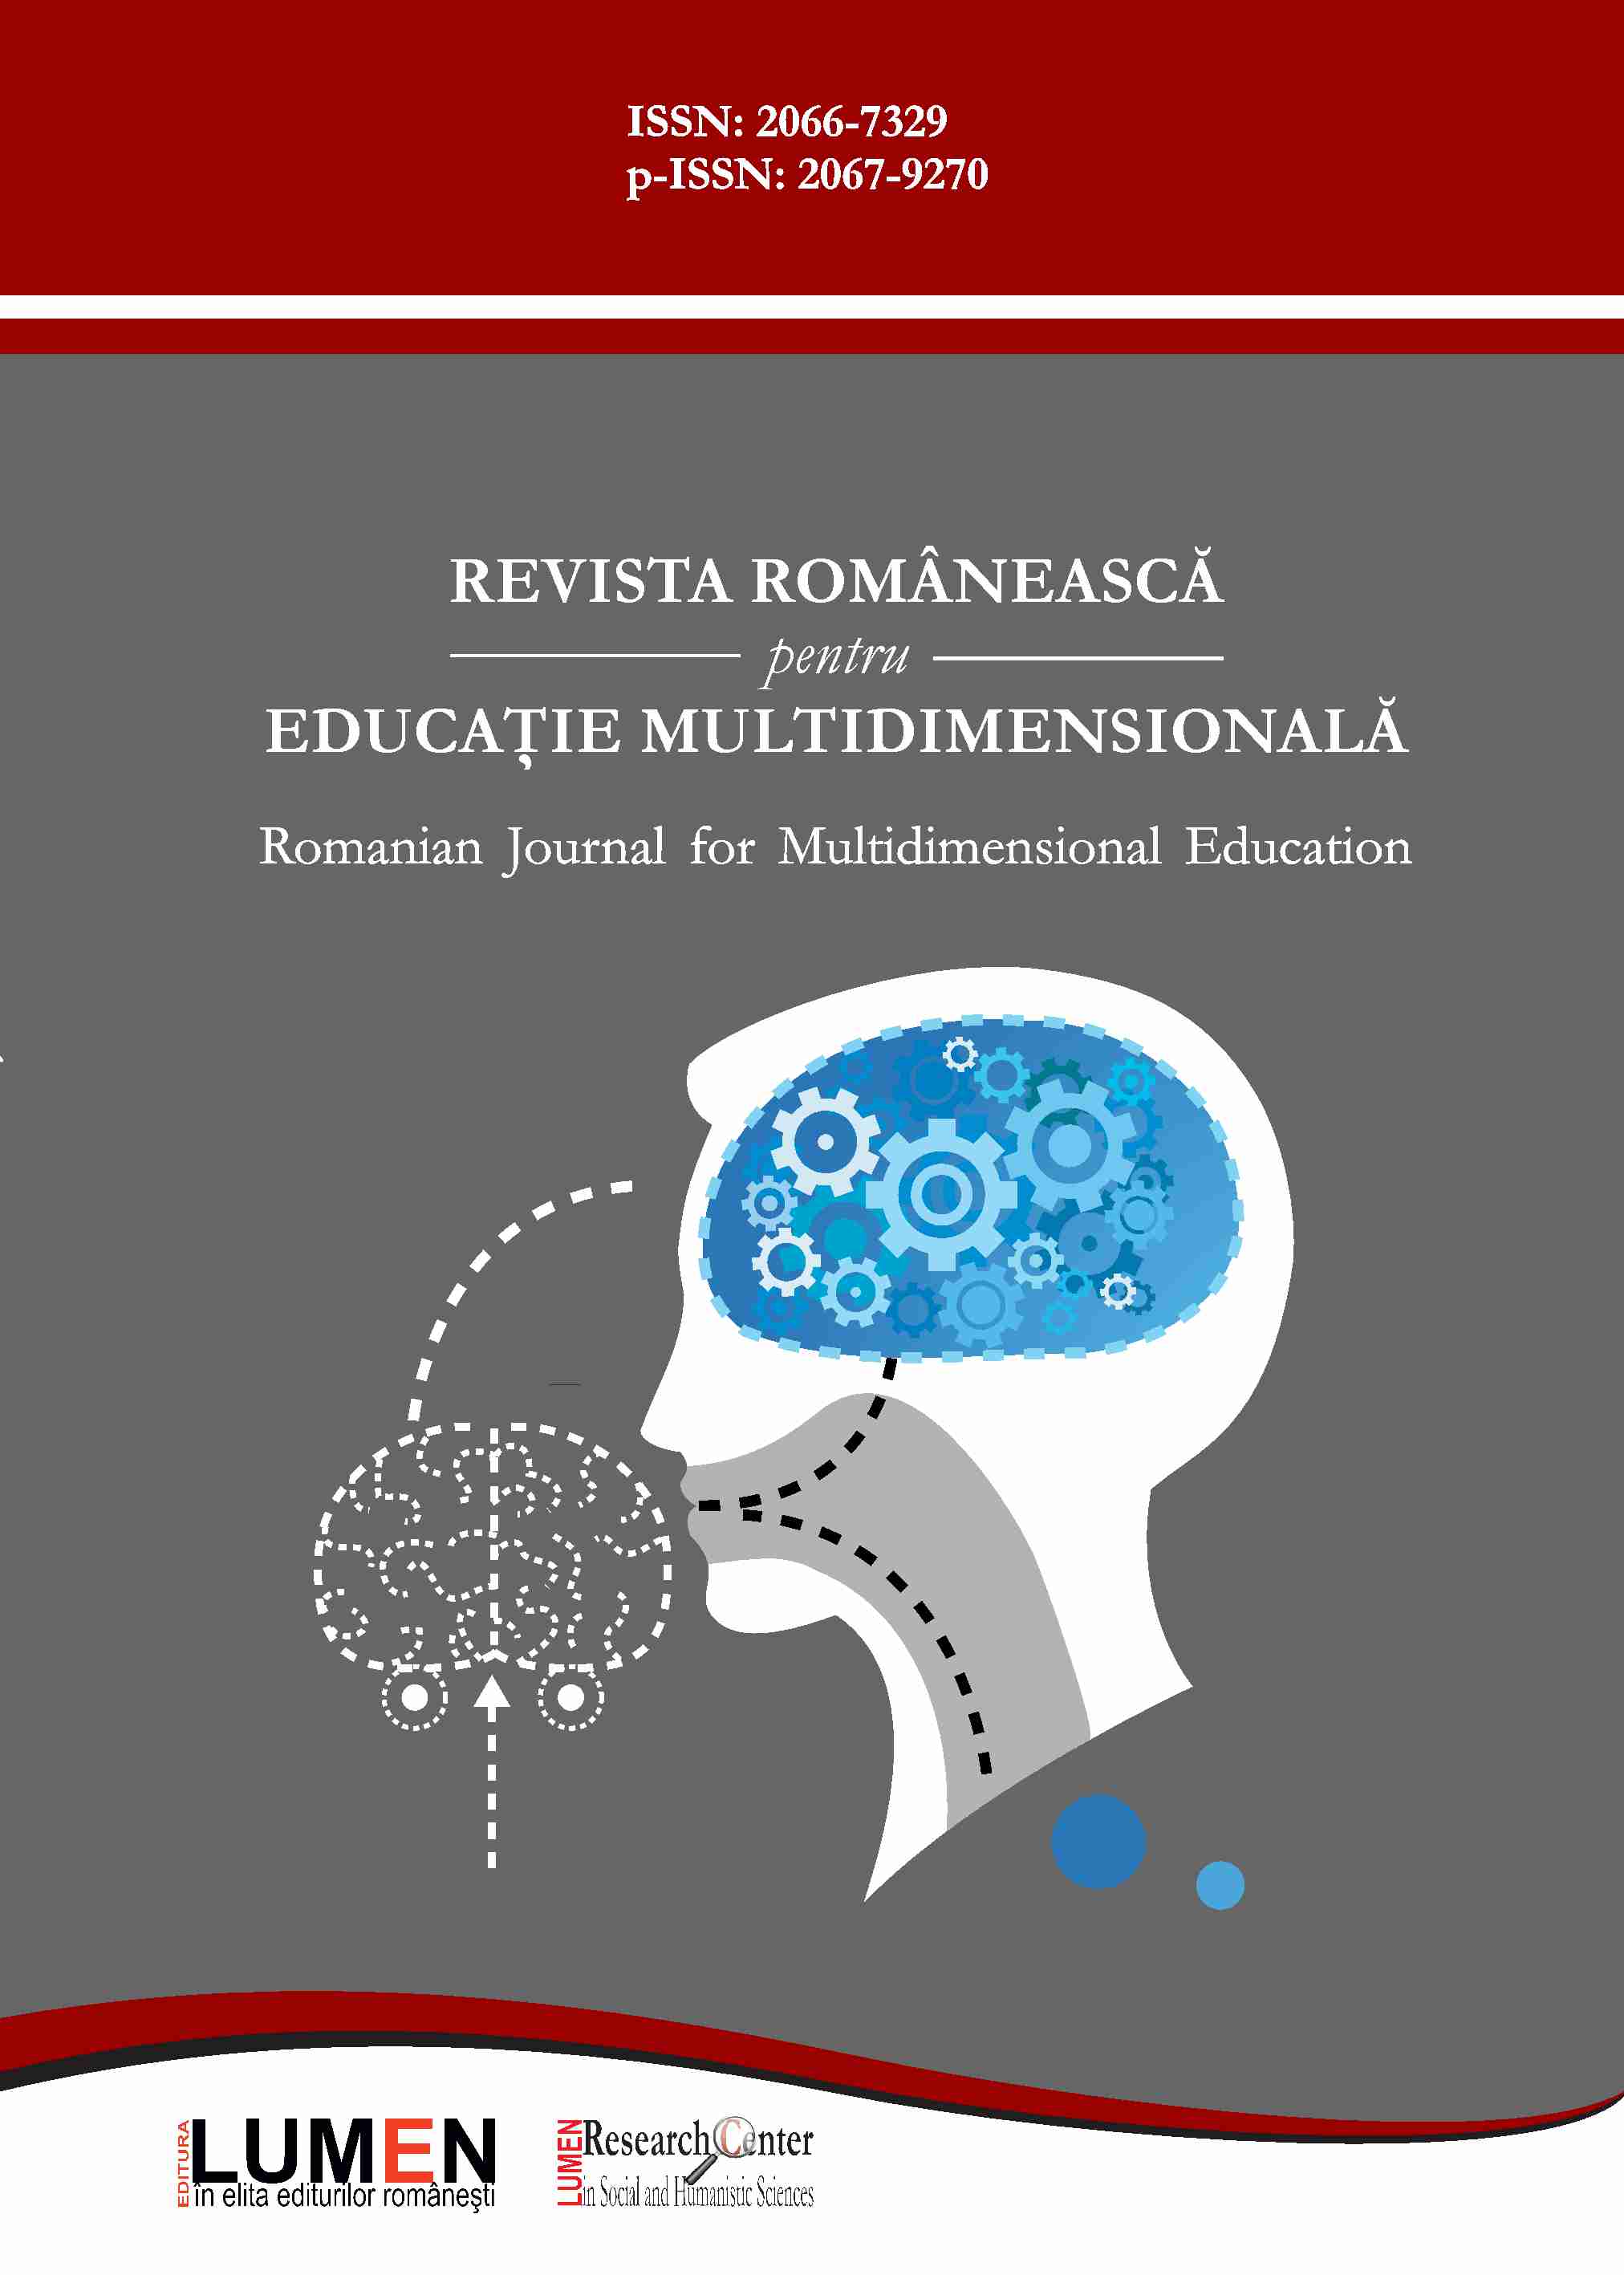 A Comparison between Deep Patterns of Education within Reformative Views in Contemporary Romania with Respect to Critical Thinking and Philosophical Competencies